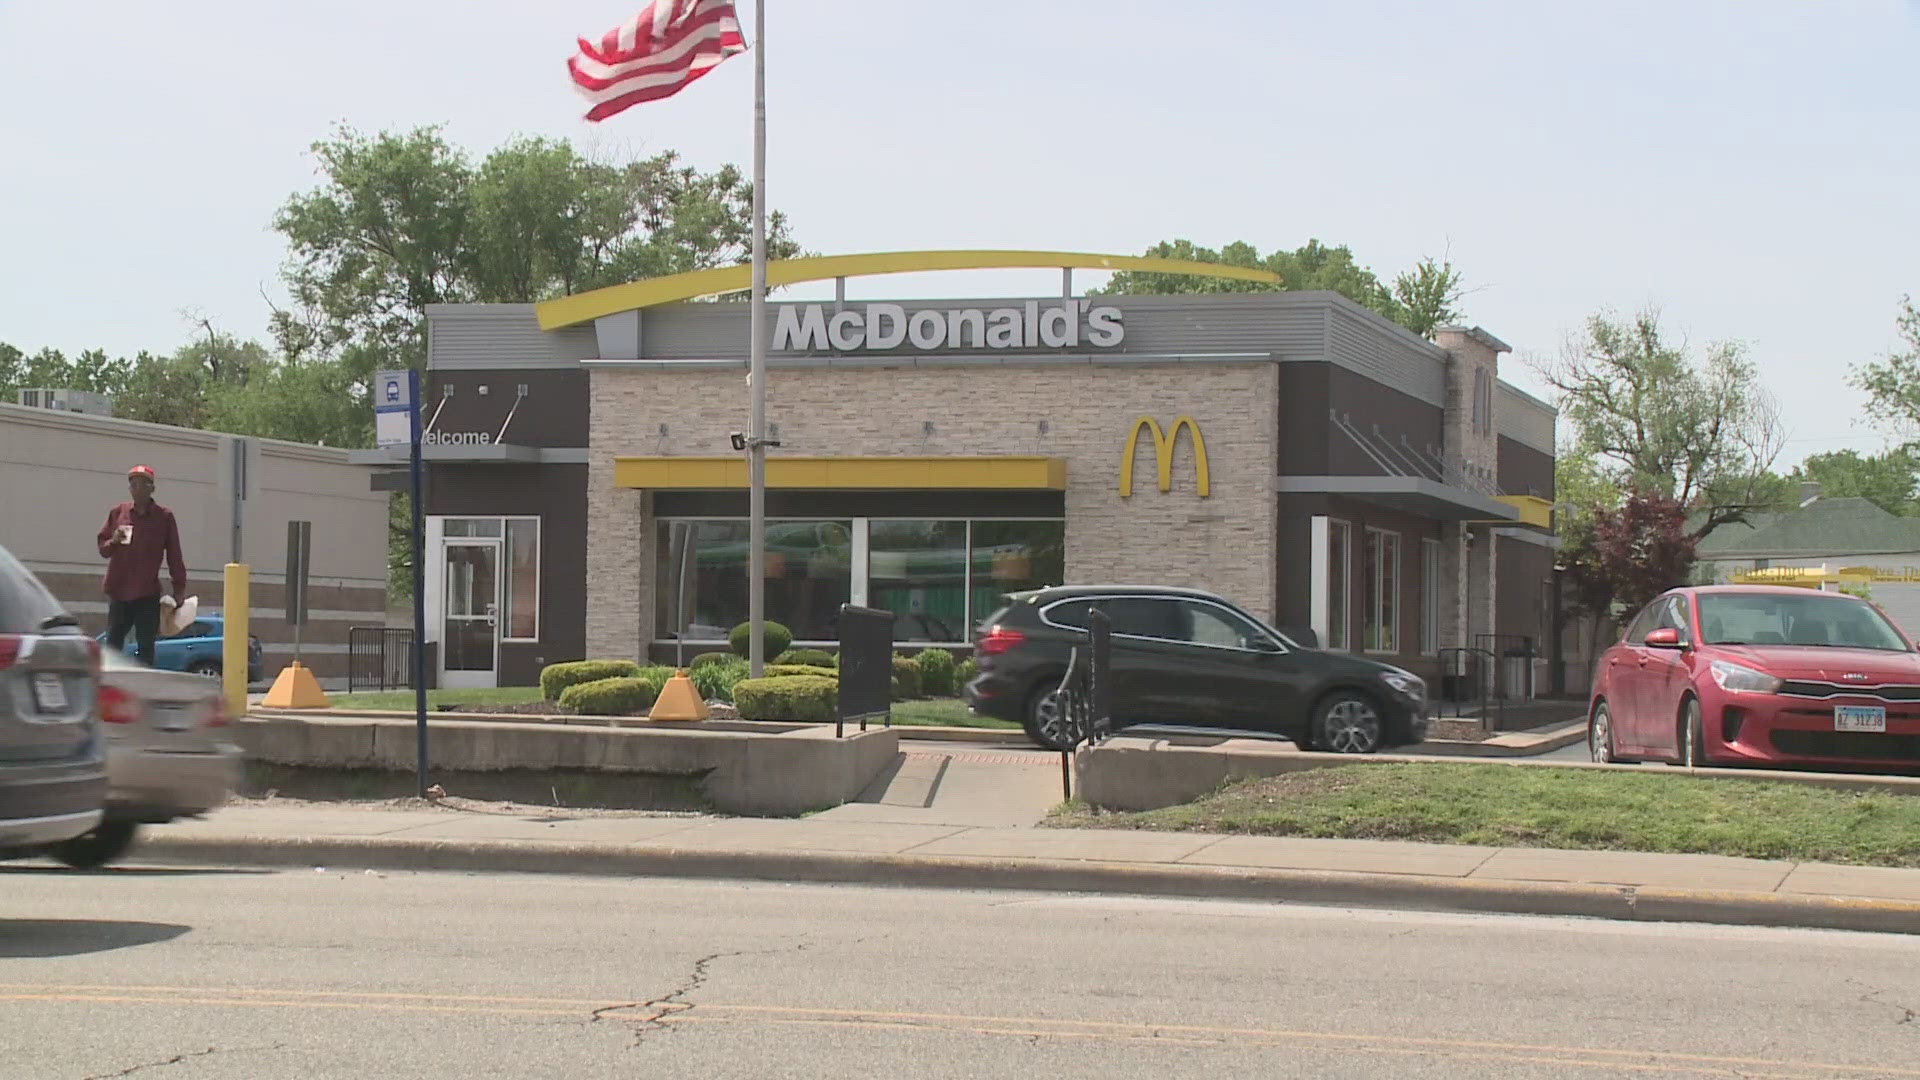 One person died and another was hospitalized Wednesday night after a shooting at a McDonald's in East St. Louis.